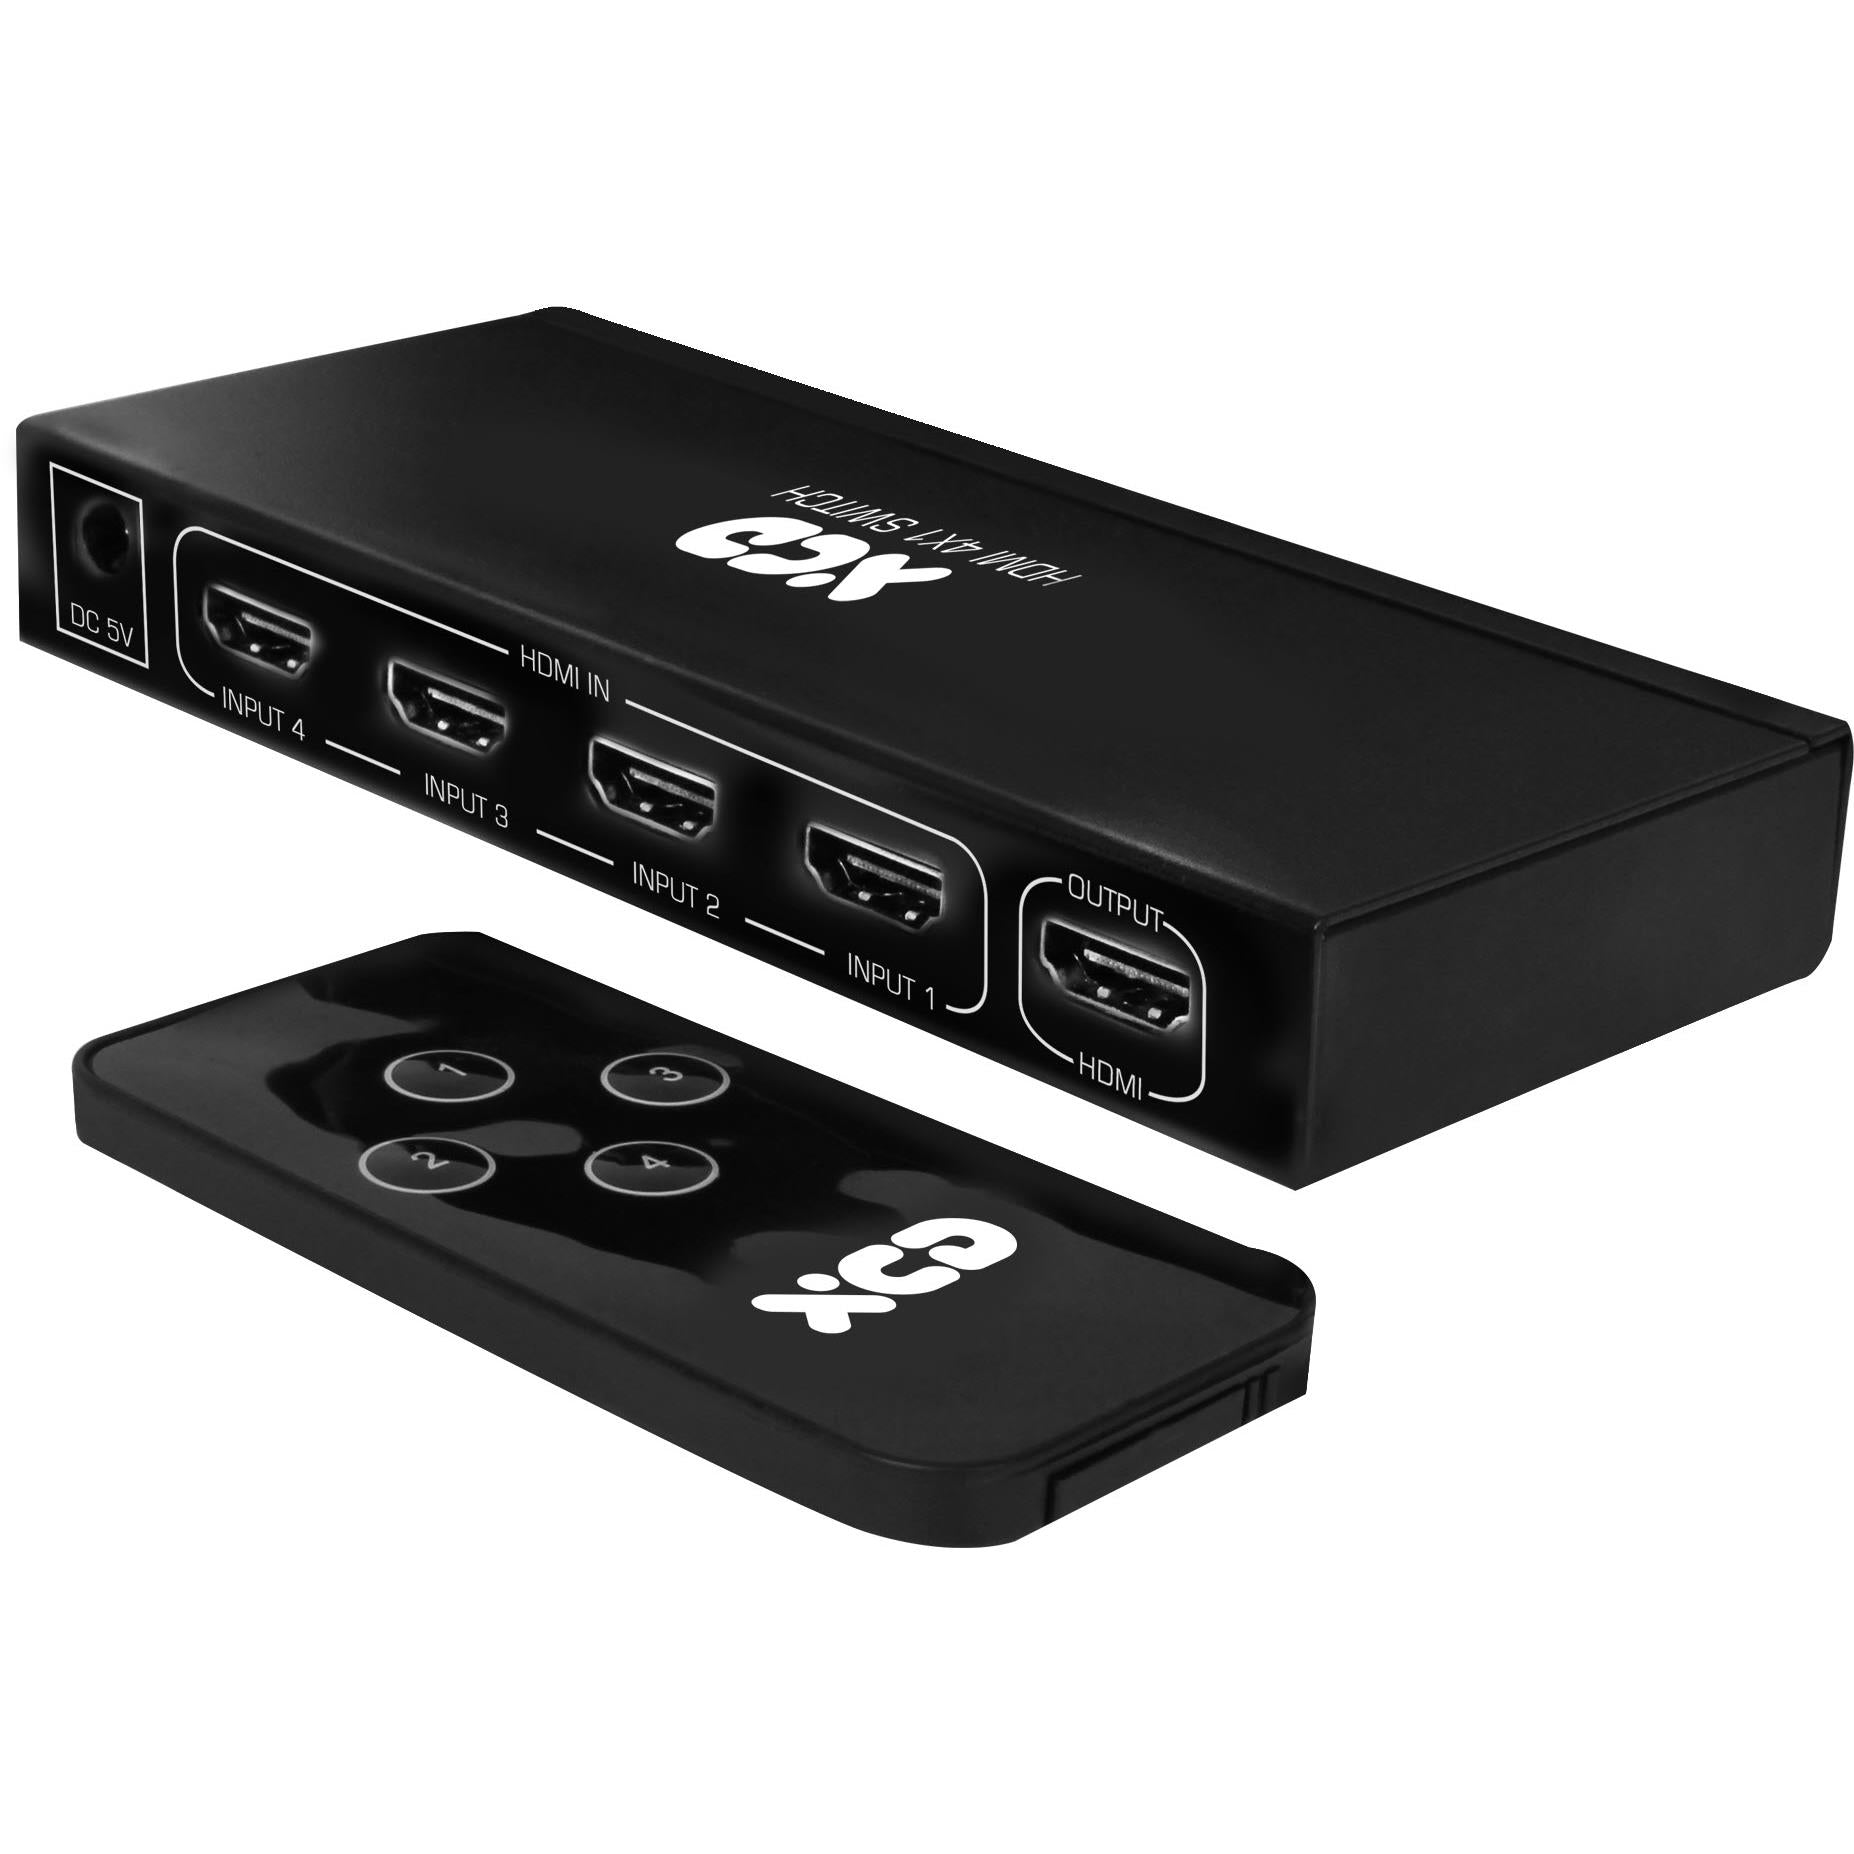 xcd essentials hdmi 4 to 1 splitter with remote